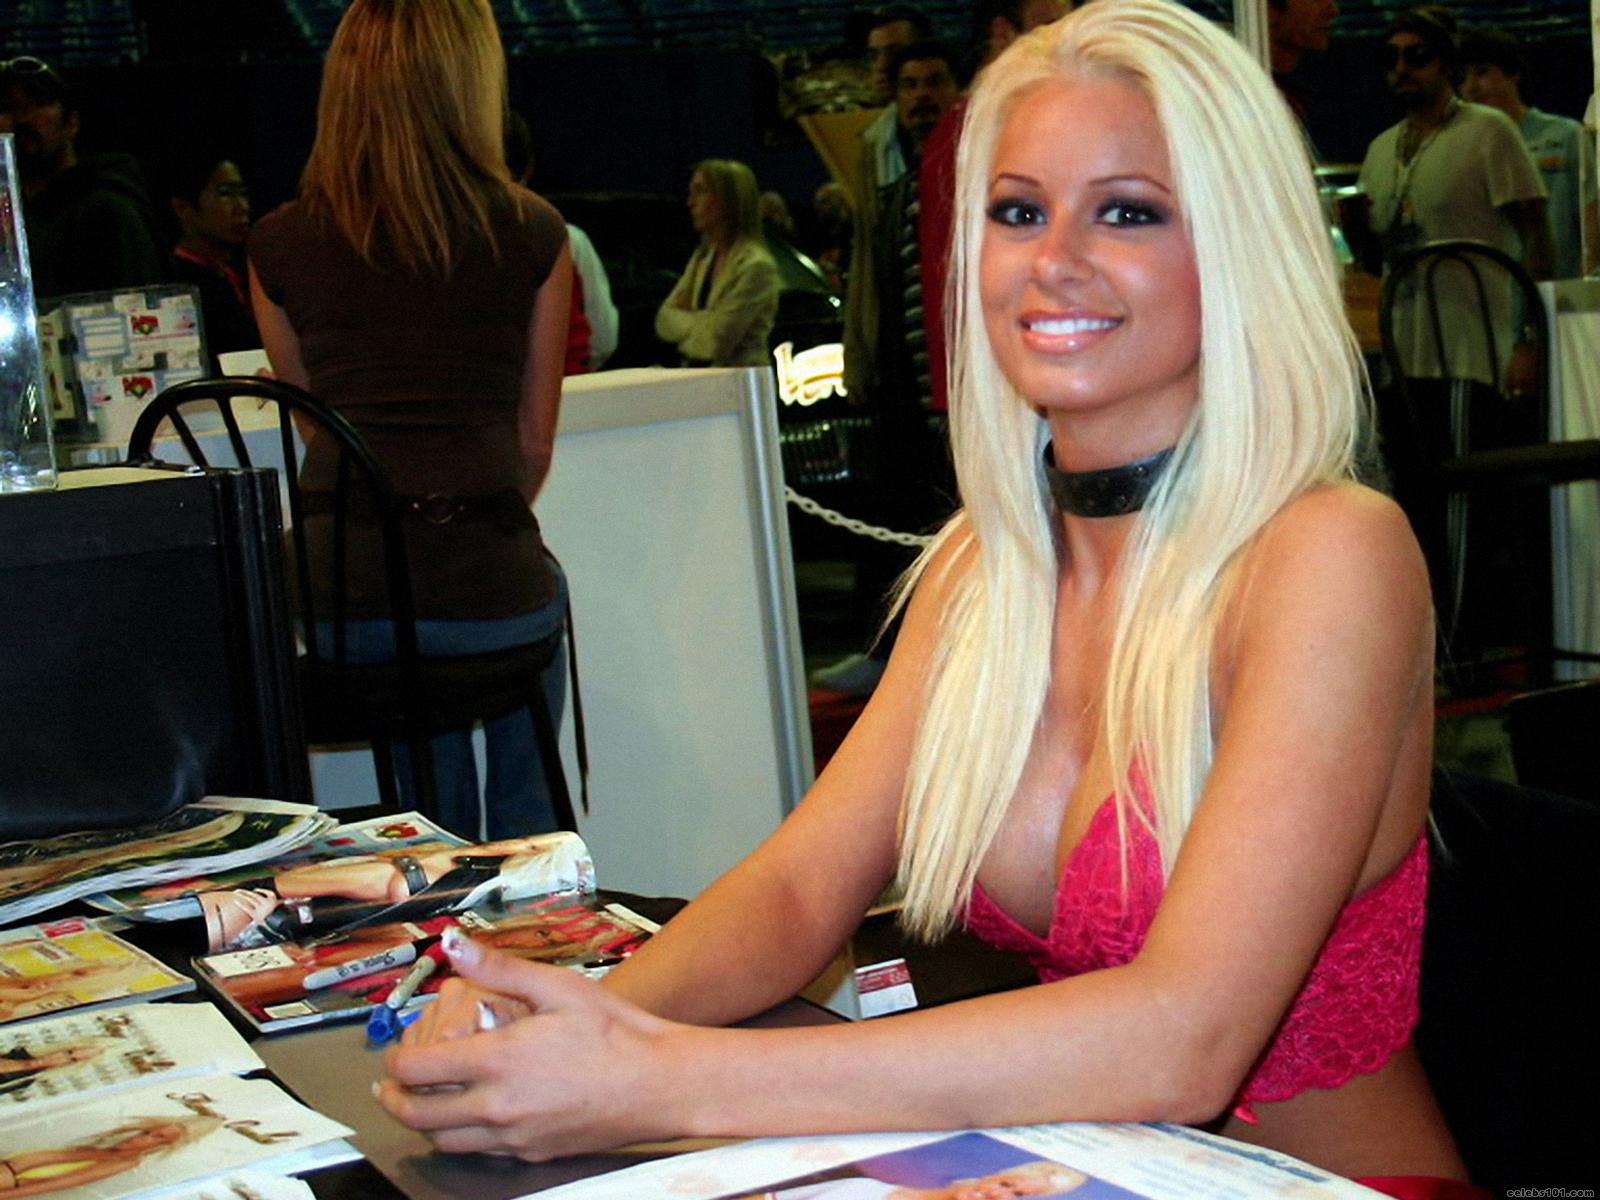 http://www.celebs101.com/wallpapers/Maryse_Ouellet/221031/Maryse_Ouellet_Wallpaper.jpg